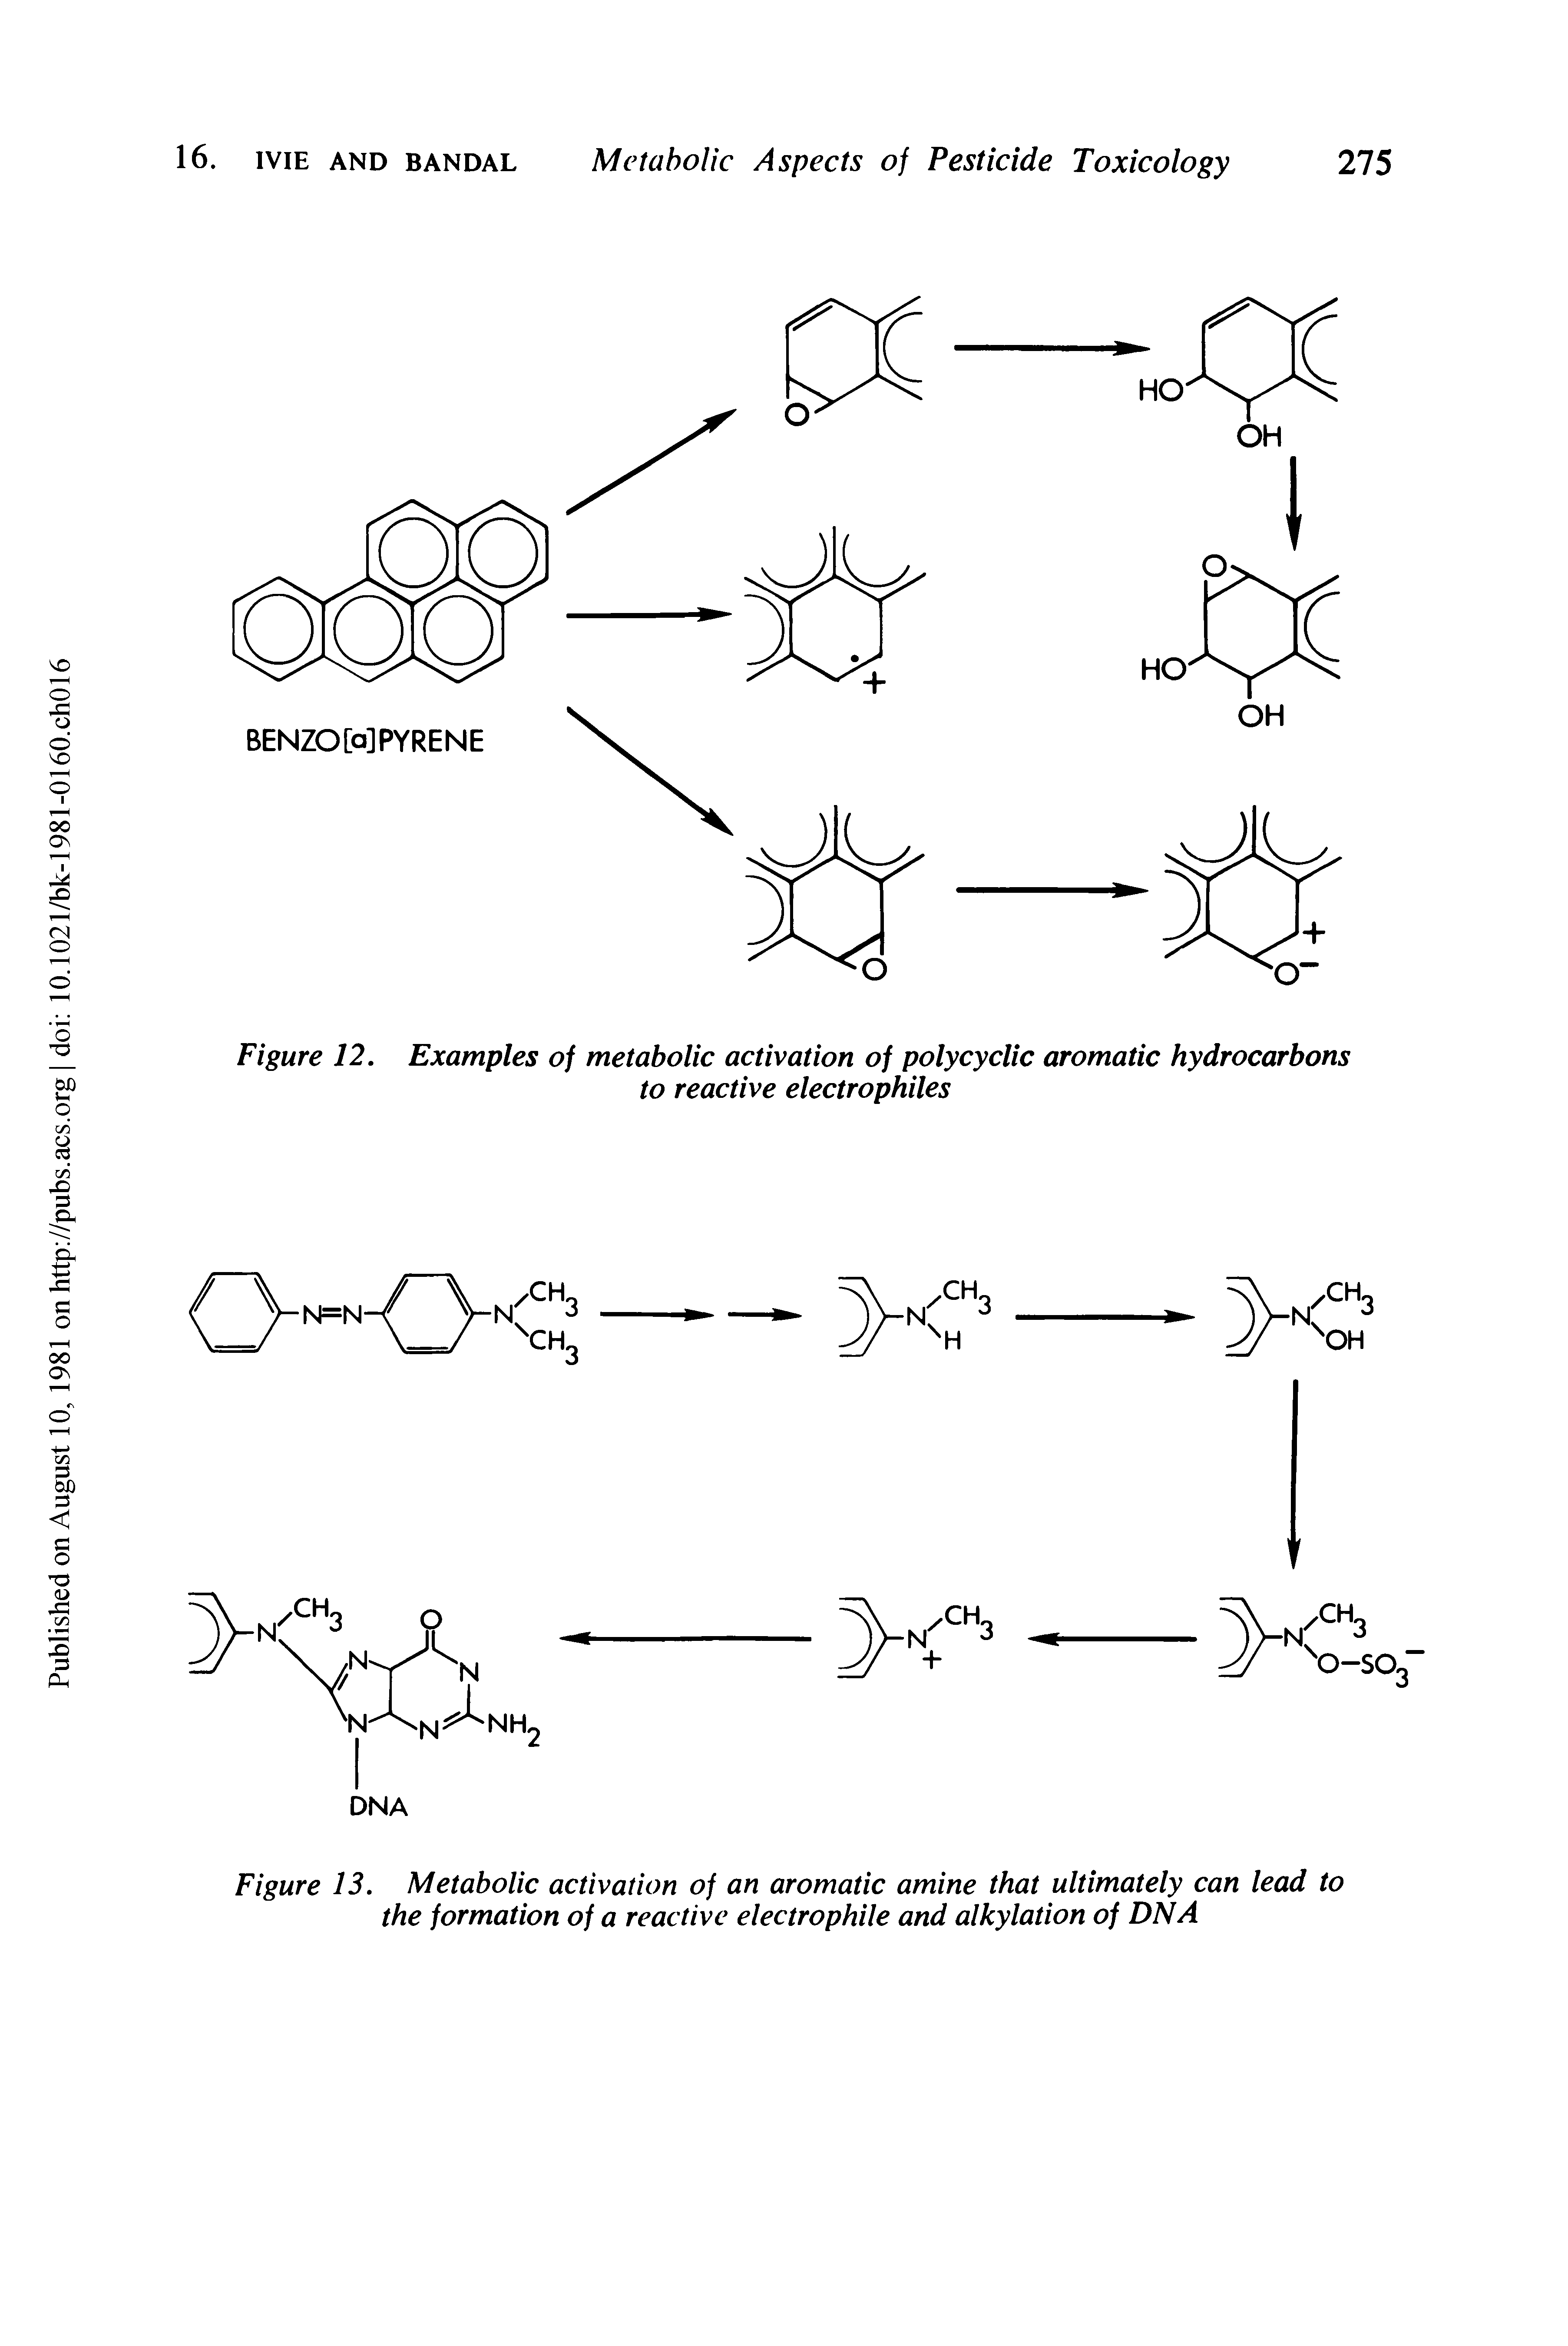 Figure 13. Metabolic activation of an aromatic amine that ultimately can lead to the formation of a reactive electrophile and alkylation of DNA...